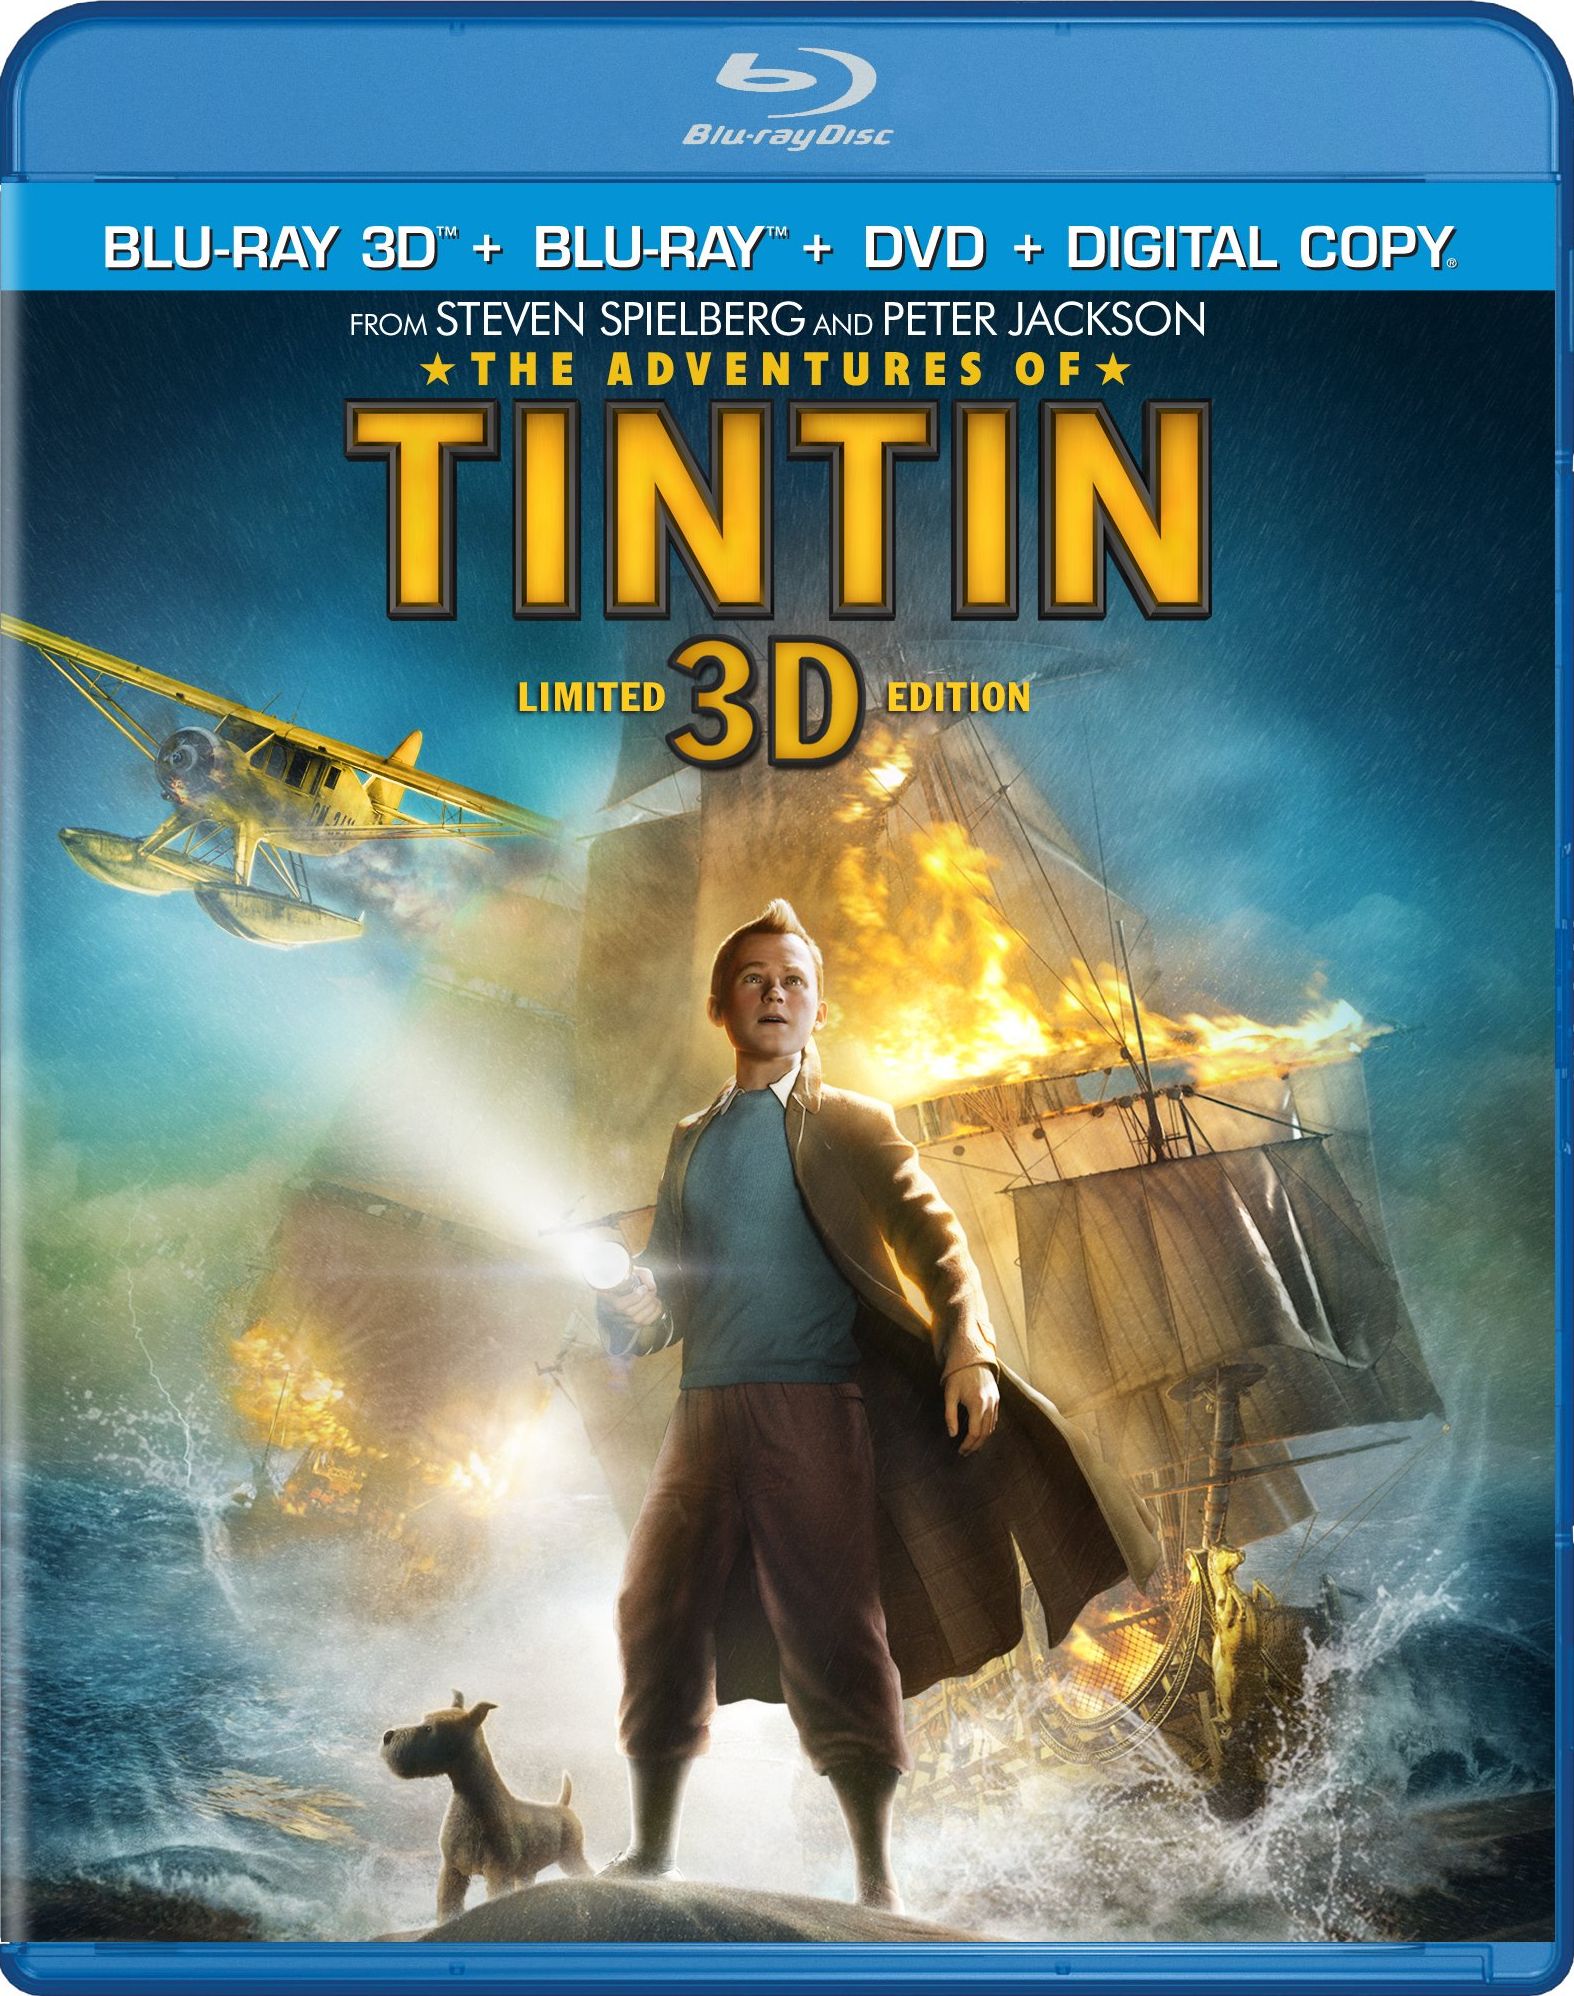 The Adventures of Tintin DVD Release Date March 13, 2012